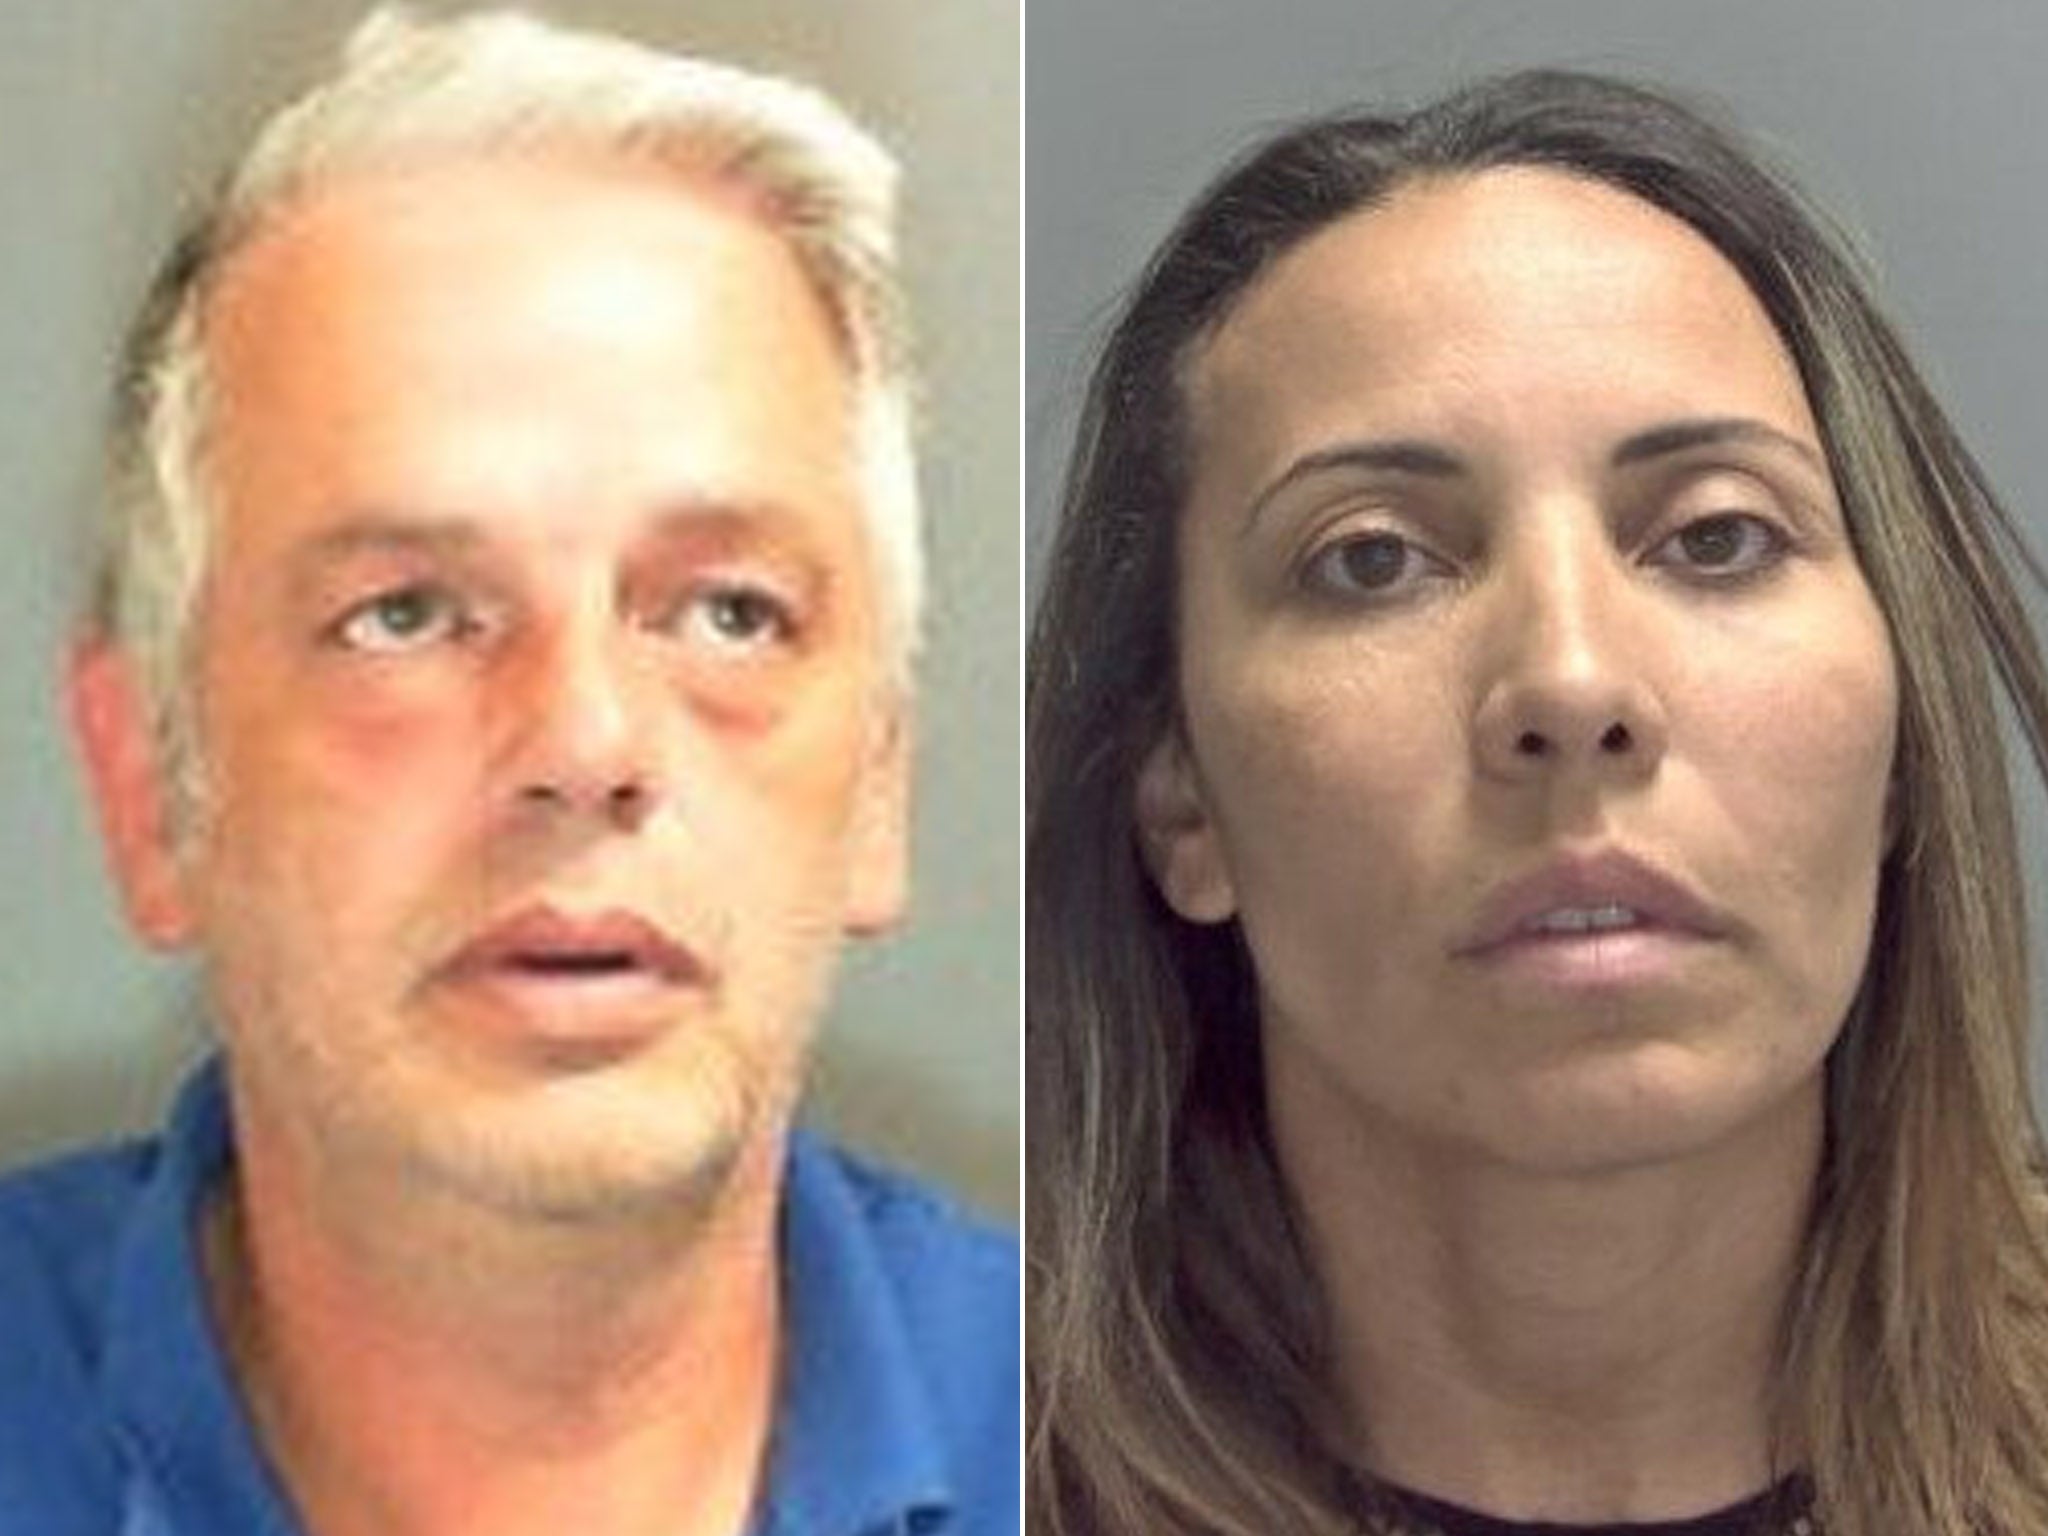 Couple rented flat to host trafficking victims for sex work